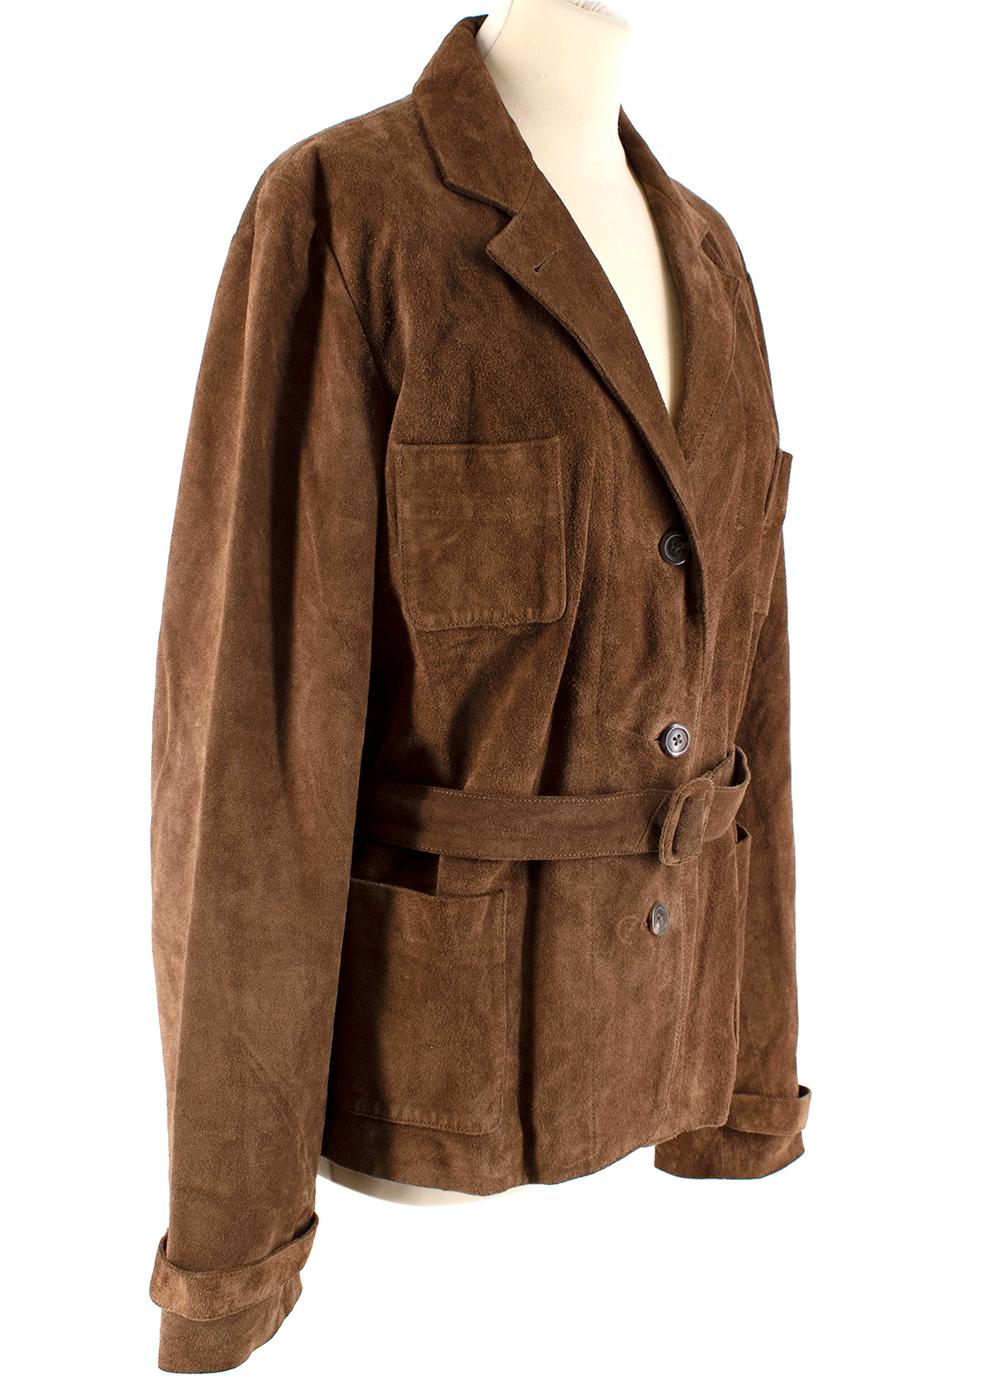 Ralph Lauren Brown Suede Leather Jacket with Belt

-Soft suede leather material
-Four front pockets
-Four button enclosures down front
-Belted and fully lined

Materials:
100% Genuine Leather
Lining: 100% viscose

Made in China
Dry clean